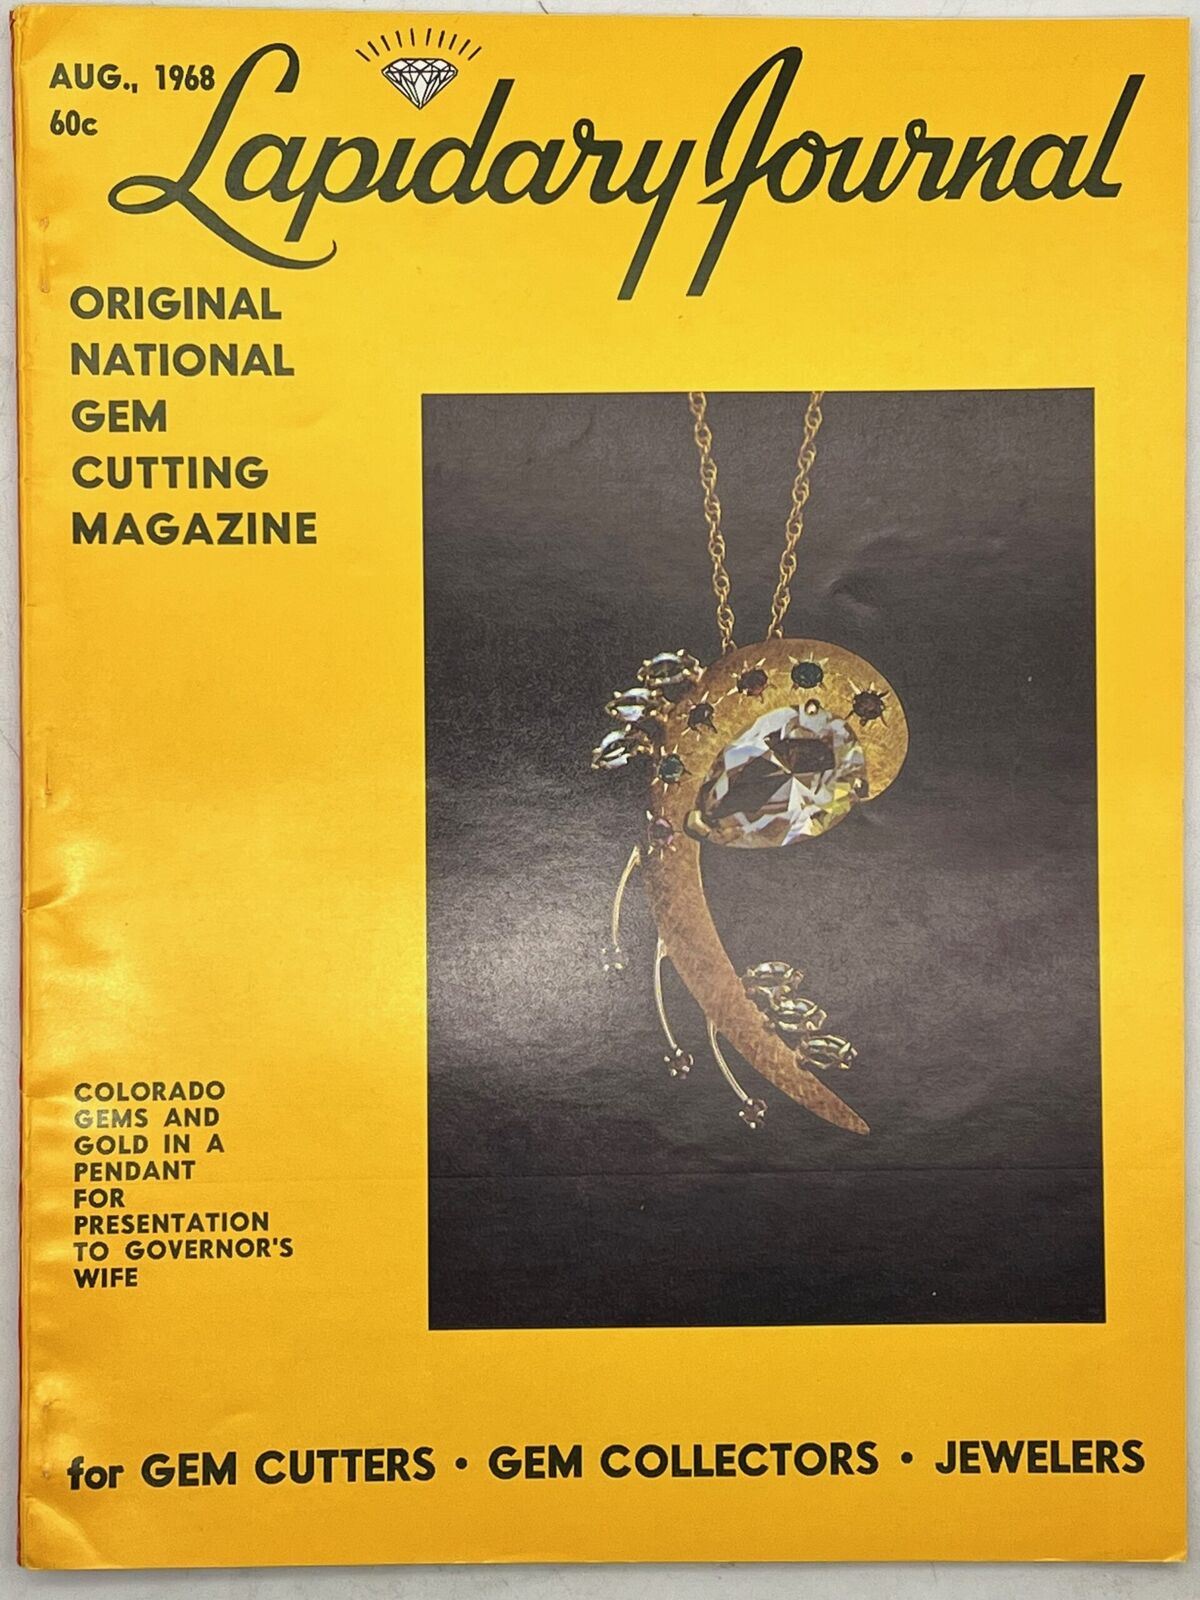 Lapidary Journal Magazine 1968 August Colorado Gems and Gold in Pendant for P...